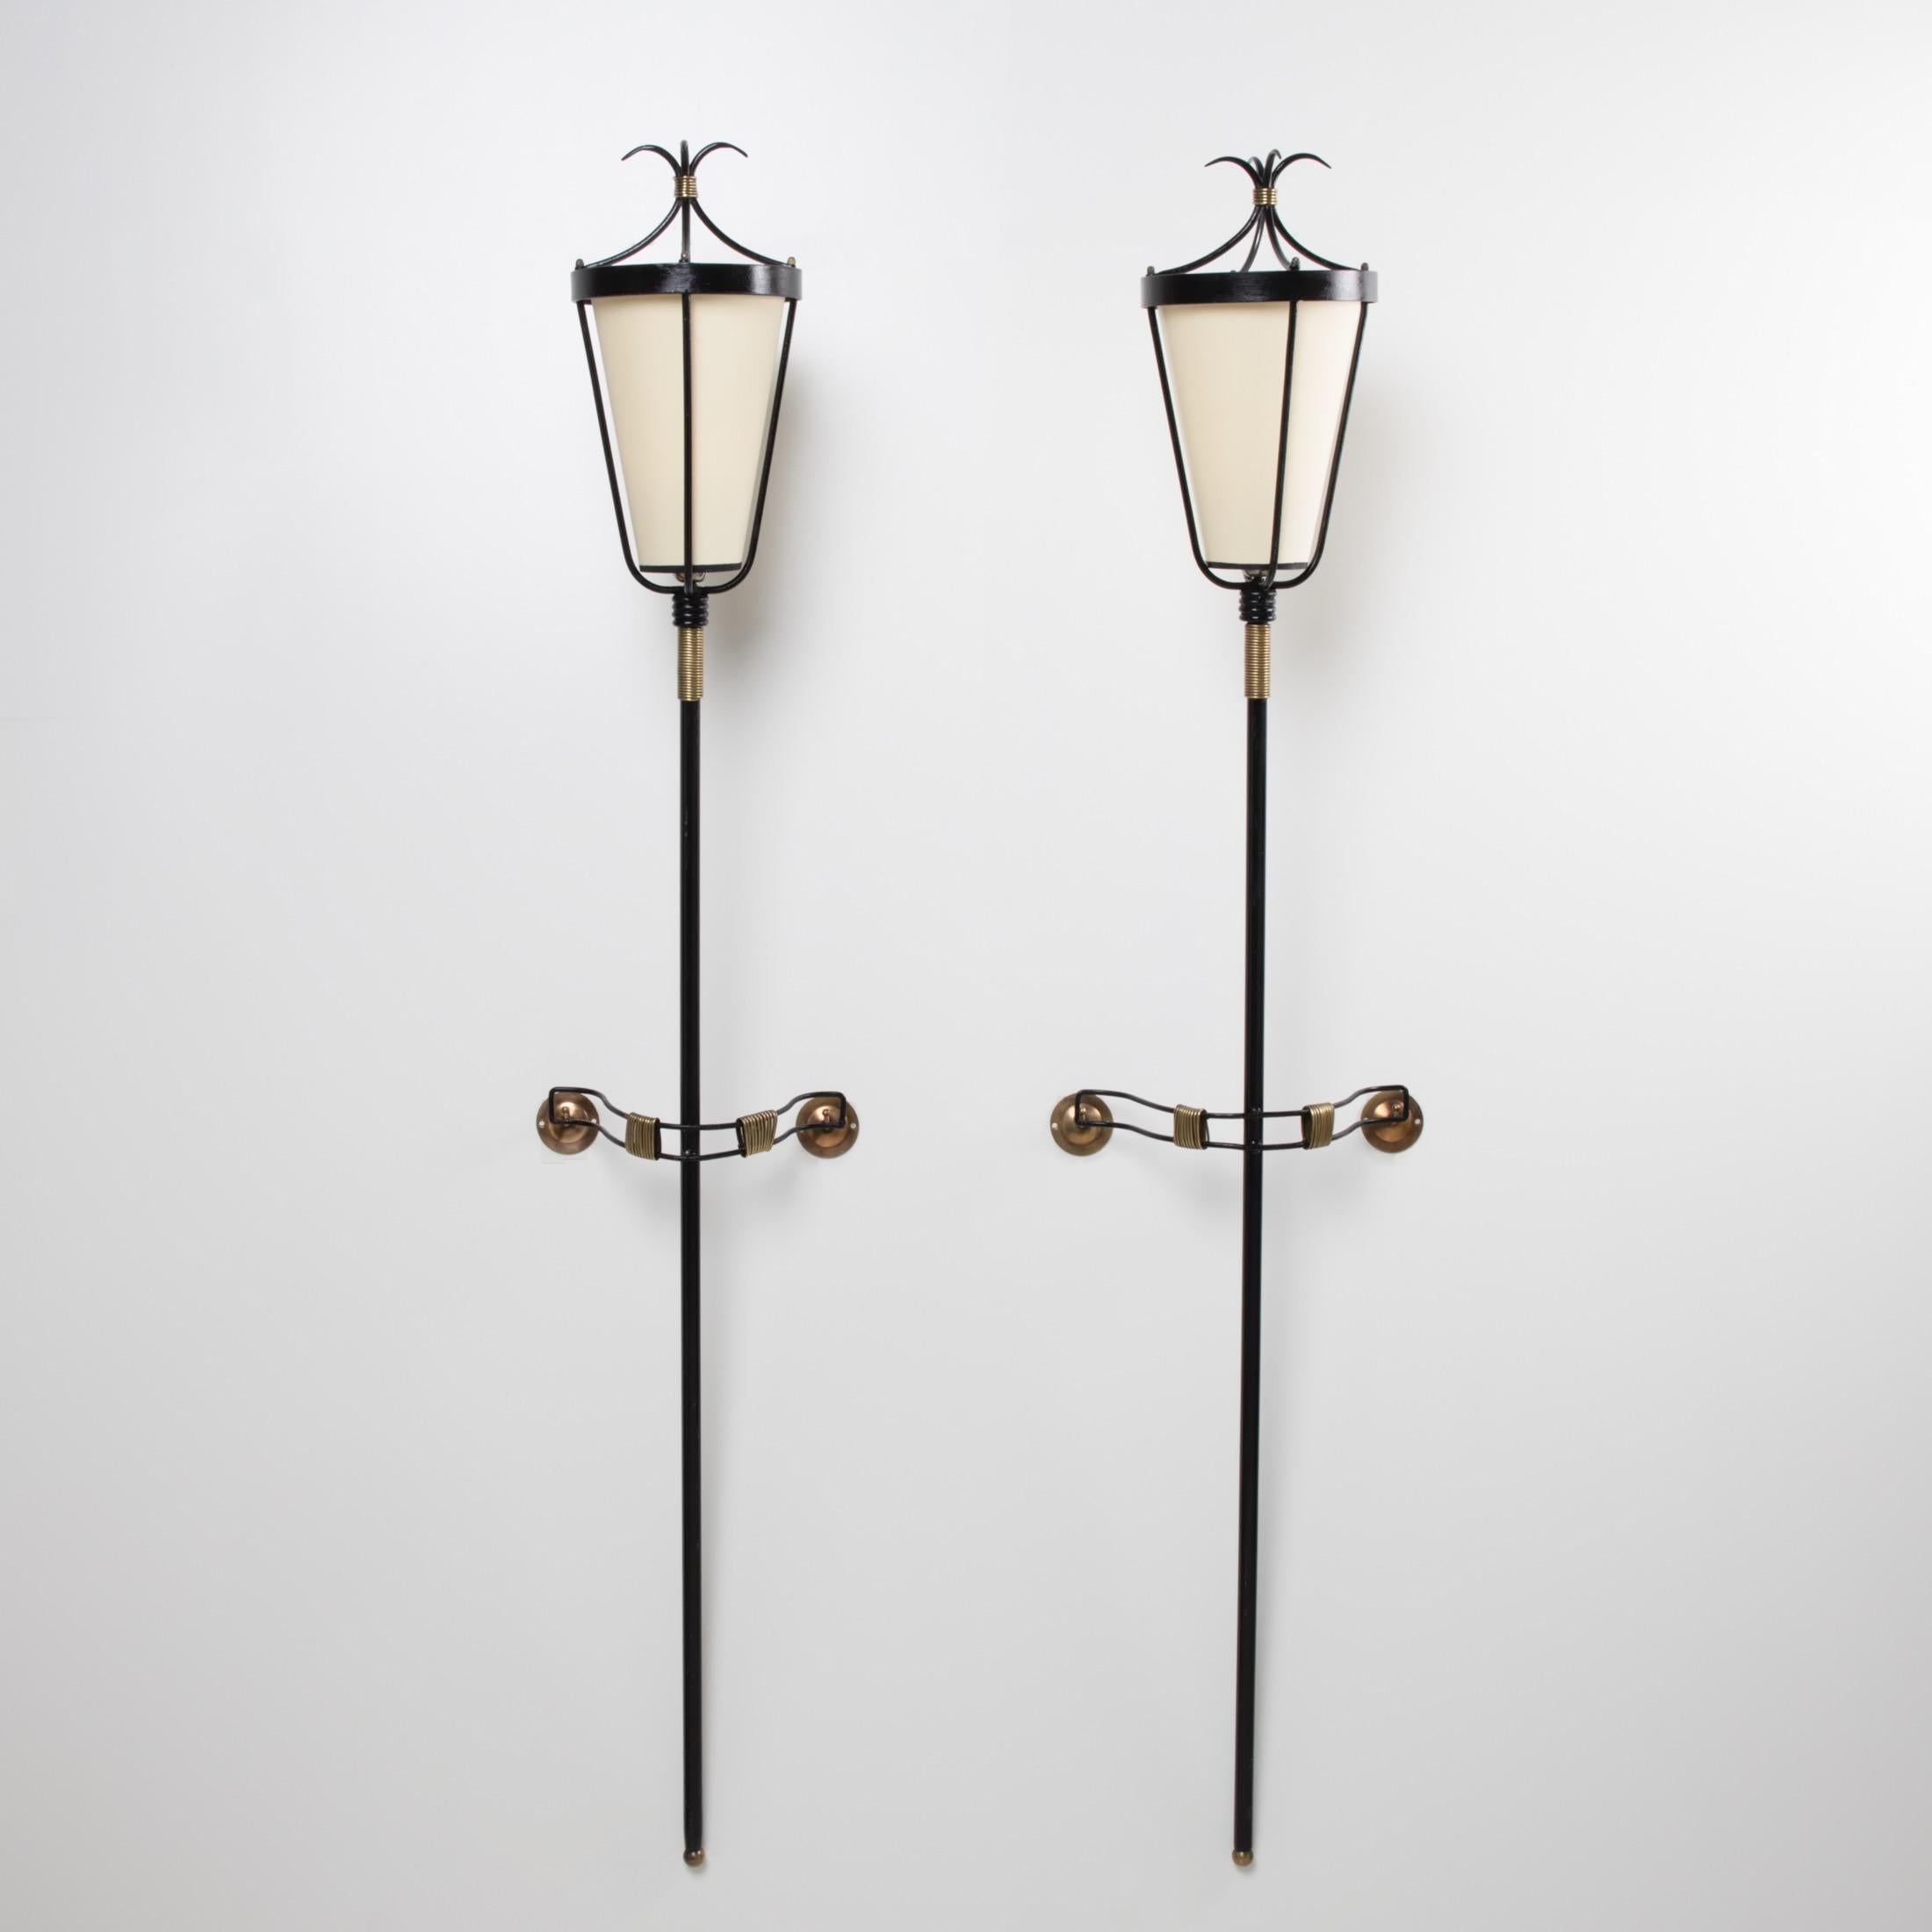 Spectacular pair of wall lights.
Work of an Art ironworker, these wrought iron sconces are composed of a long central shaft supporting a lampshade whose uprights end in a crown.
The wall brackets are equipped with brass screws, brass which is also